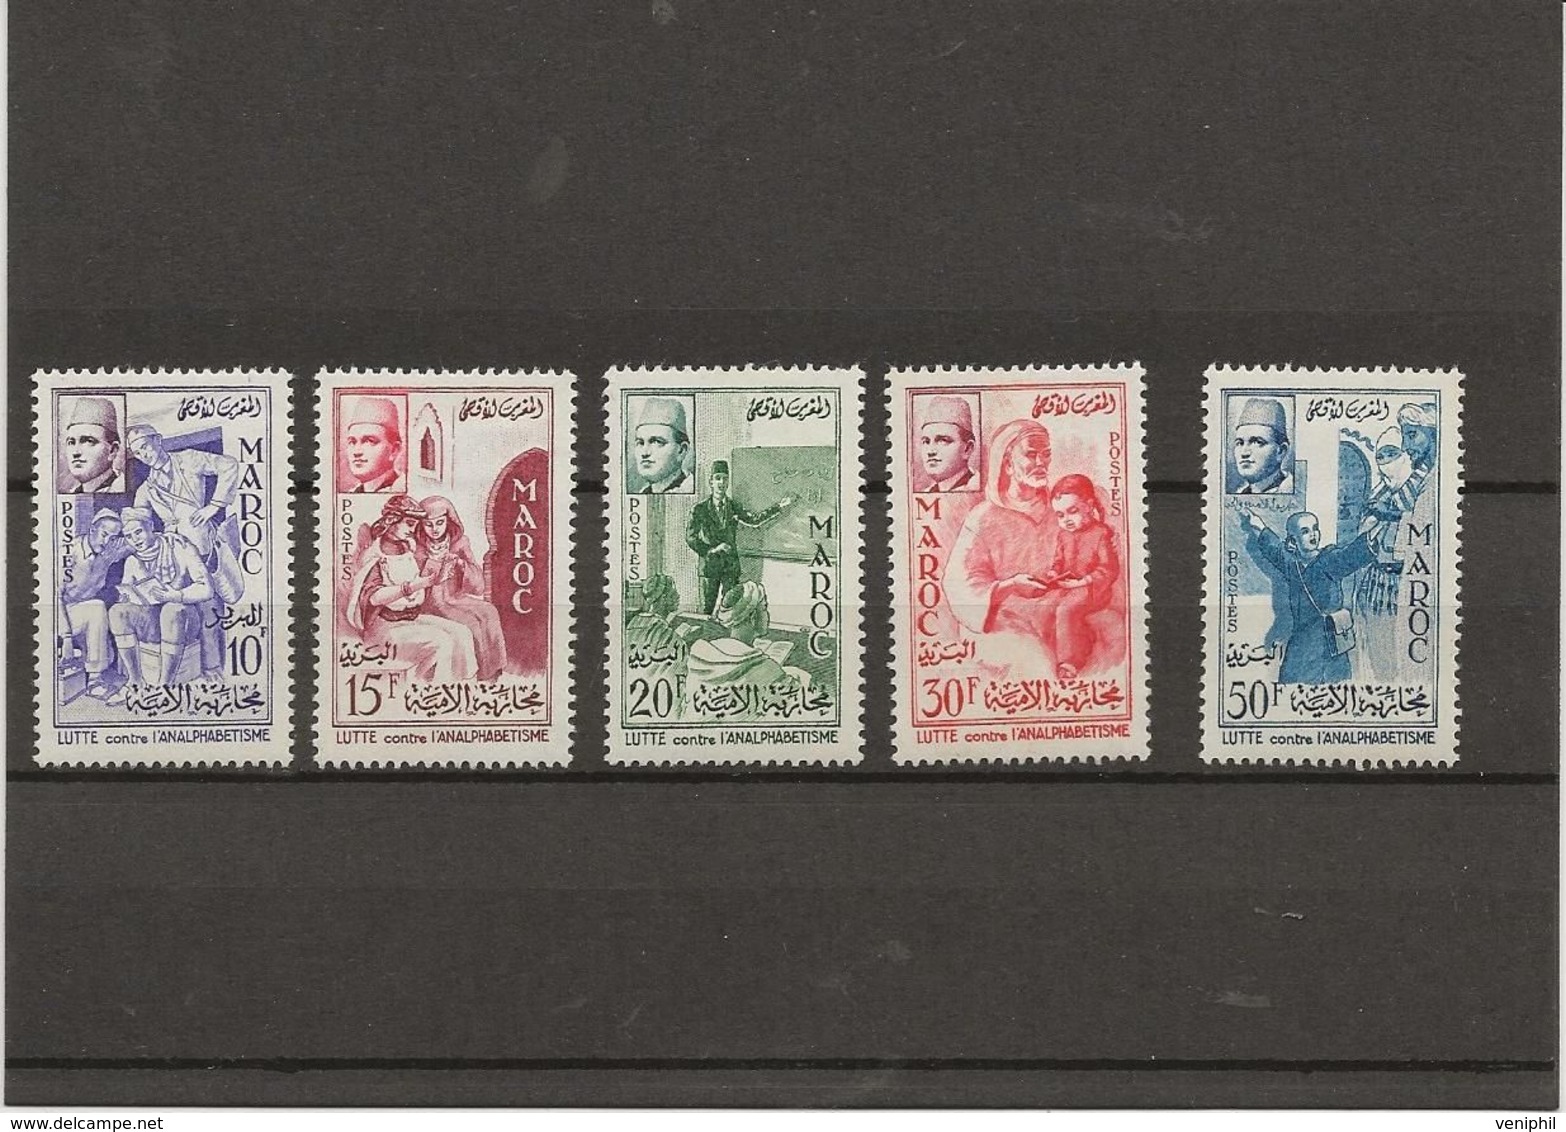 MAROC - TIMBRES N° 369 A 373 NEUF INFIME CHARNIERE -ANNEE 1956 -COTE : 27 € - Nuovi